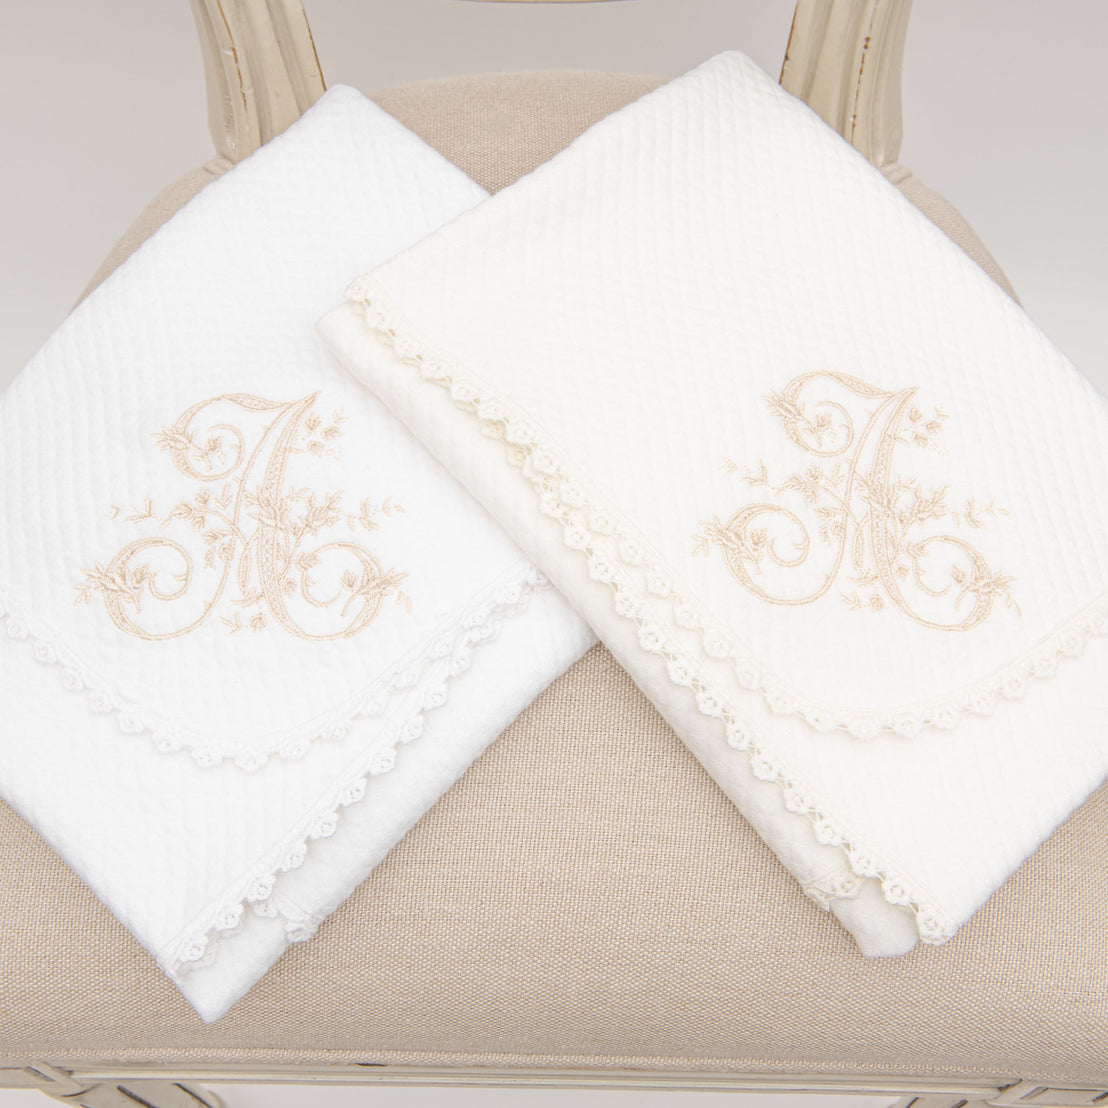 Two white embroidered baby blankets with ornate gold initial "A" designs, displayed on a beige chair with intricately detailed lace edges. These blankets are made from 100% quilted cotton.